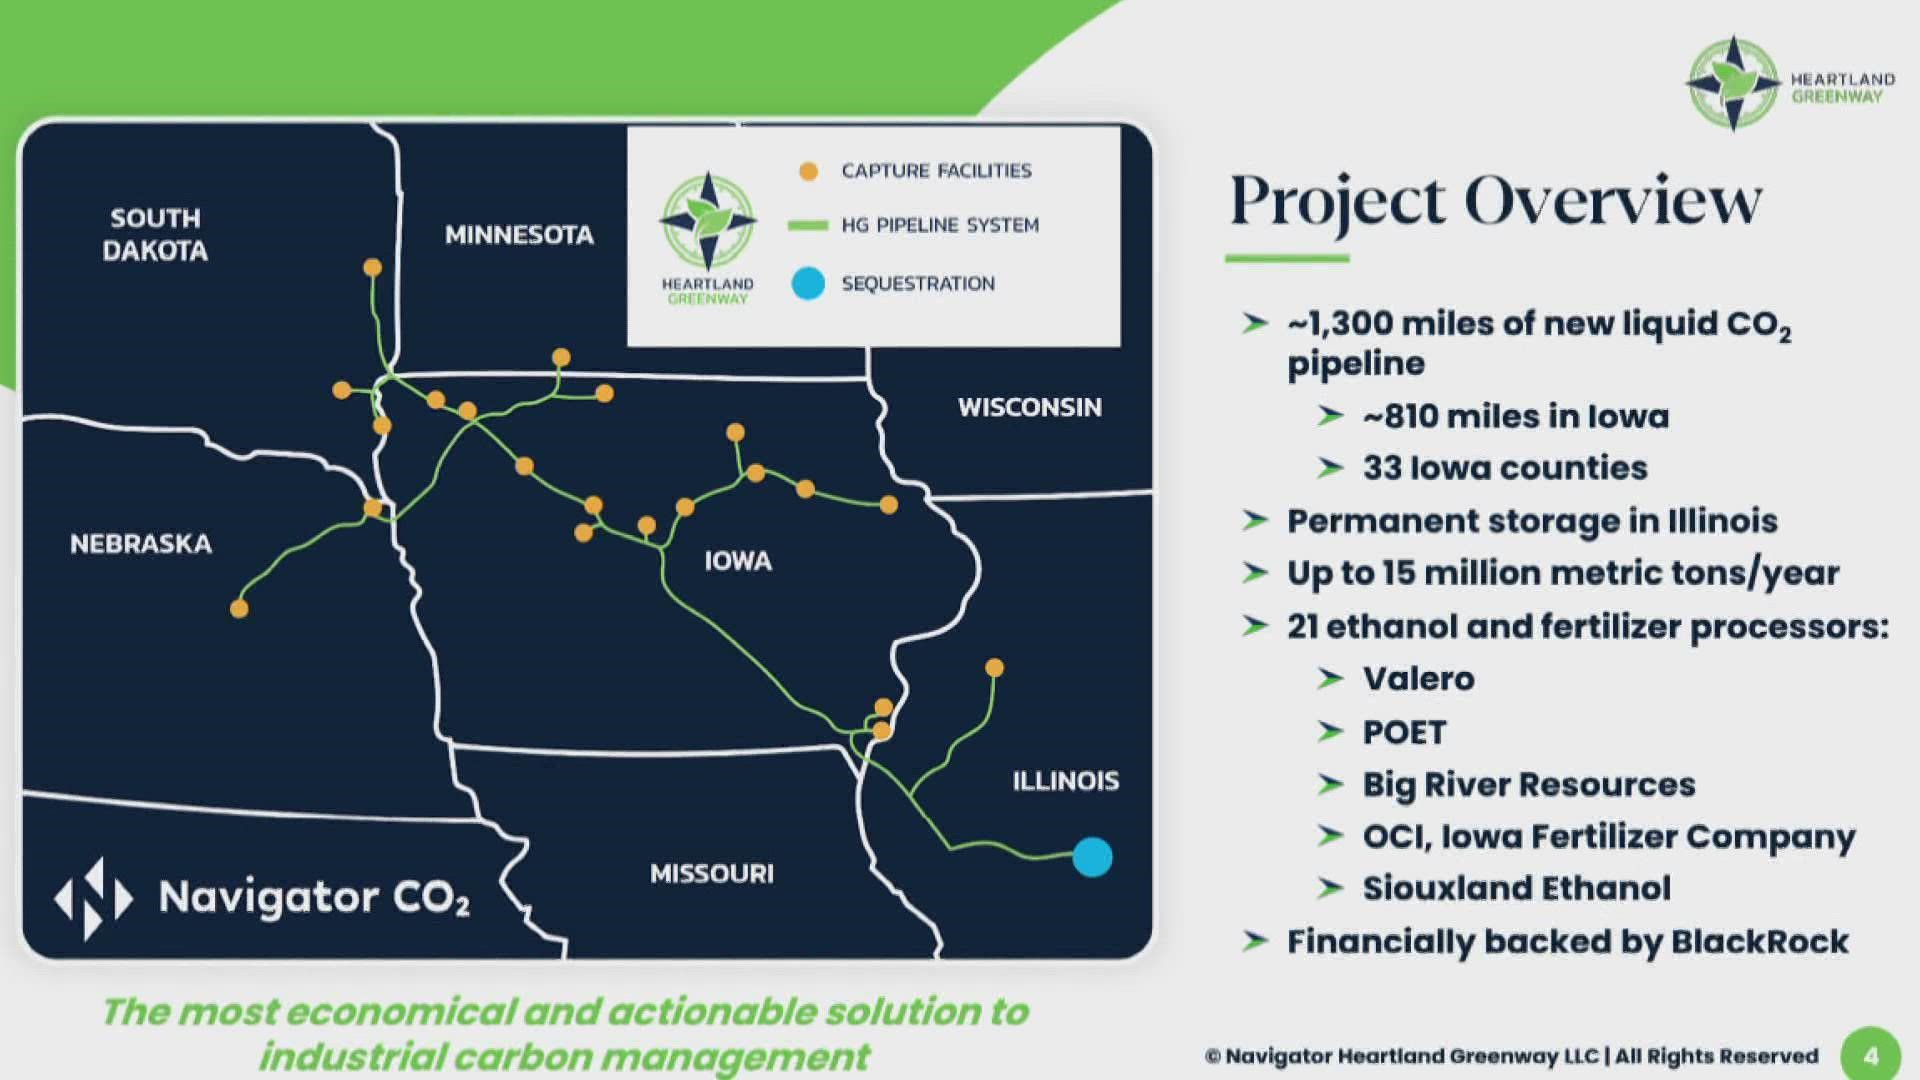 The Navigator CO2 pipeline would take carbon dioxide emissions from 21 ethanol and fertilizer processors across five states.